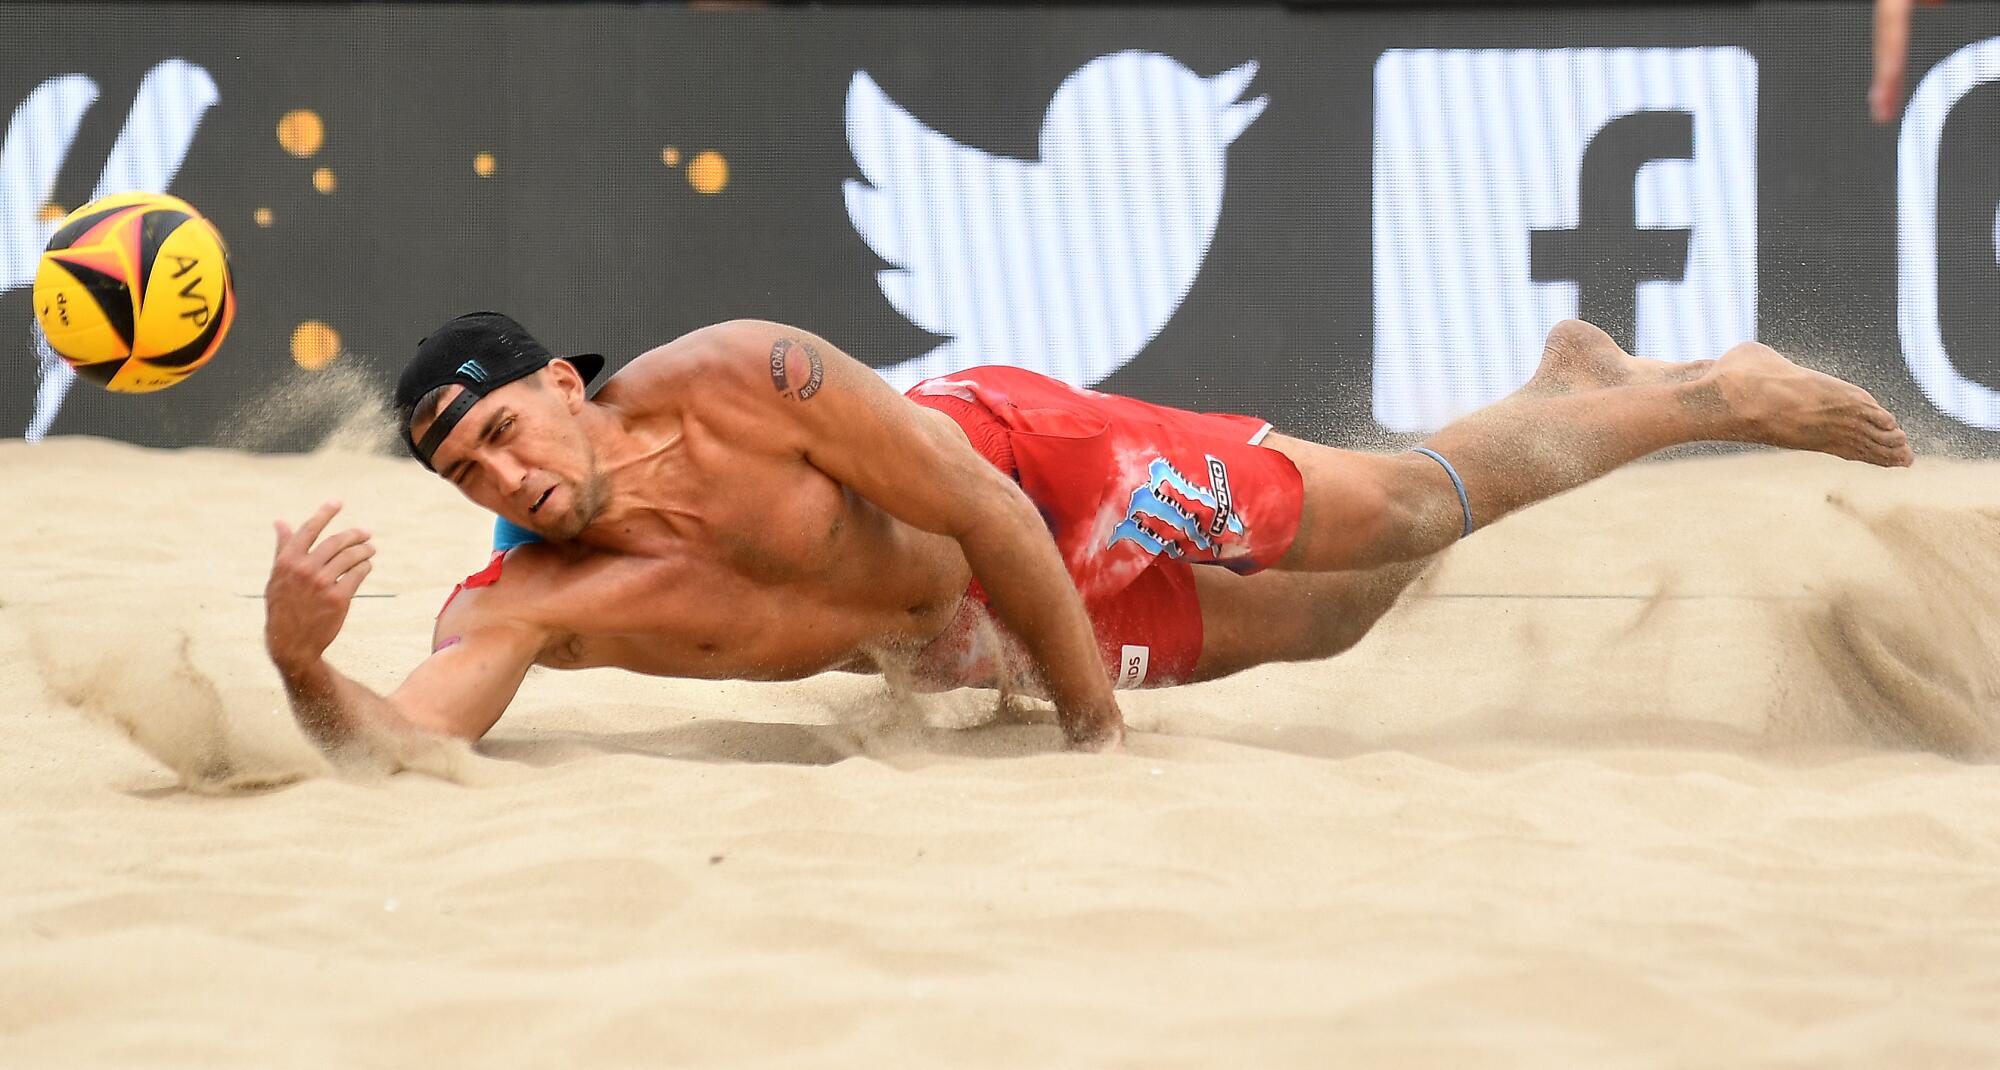 Trevor Crabb dives to the sand in a beach volleyball match.